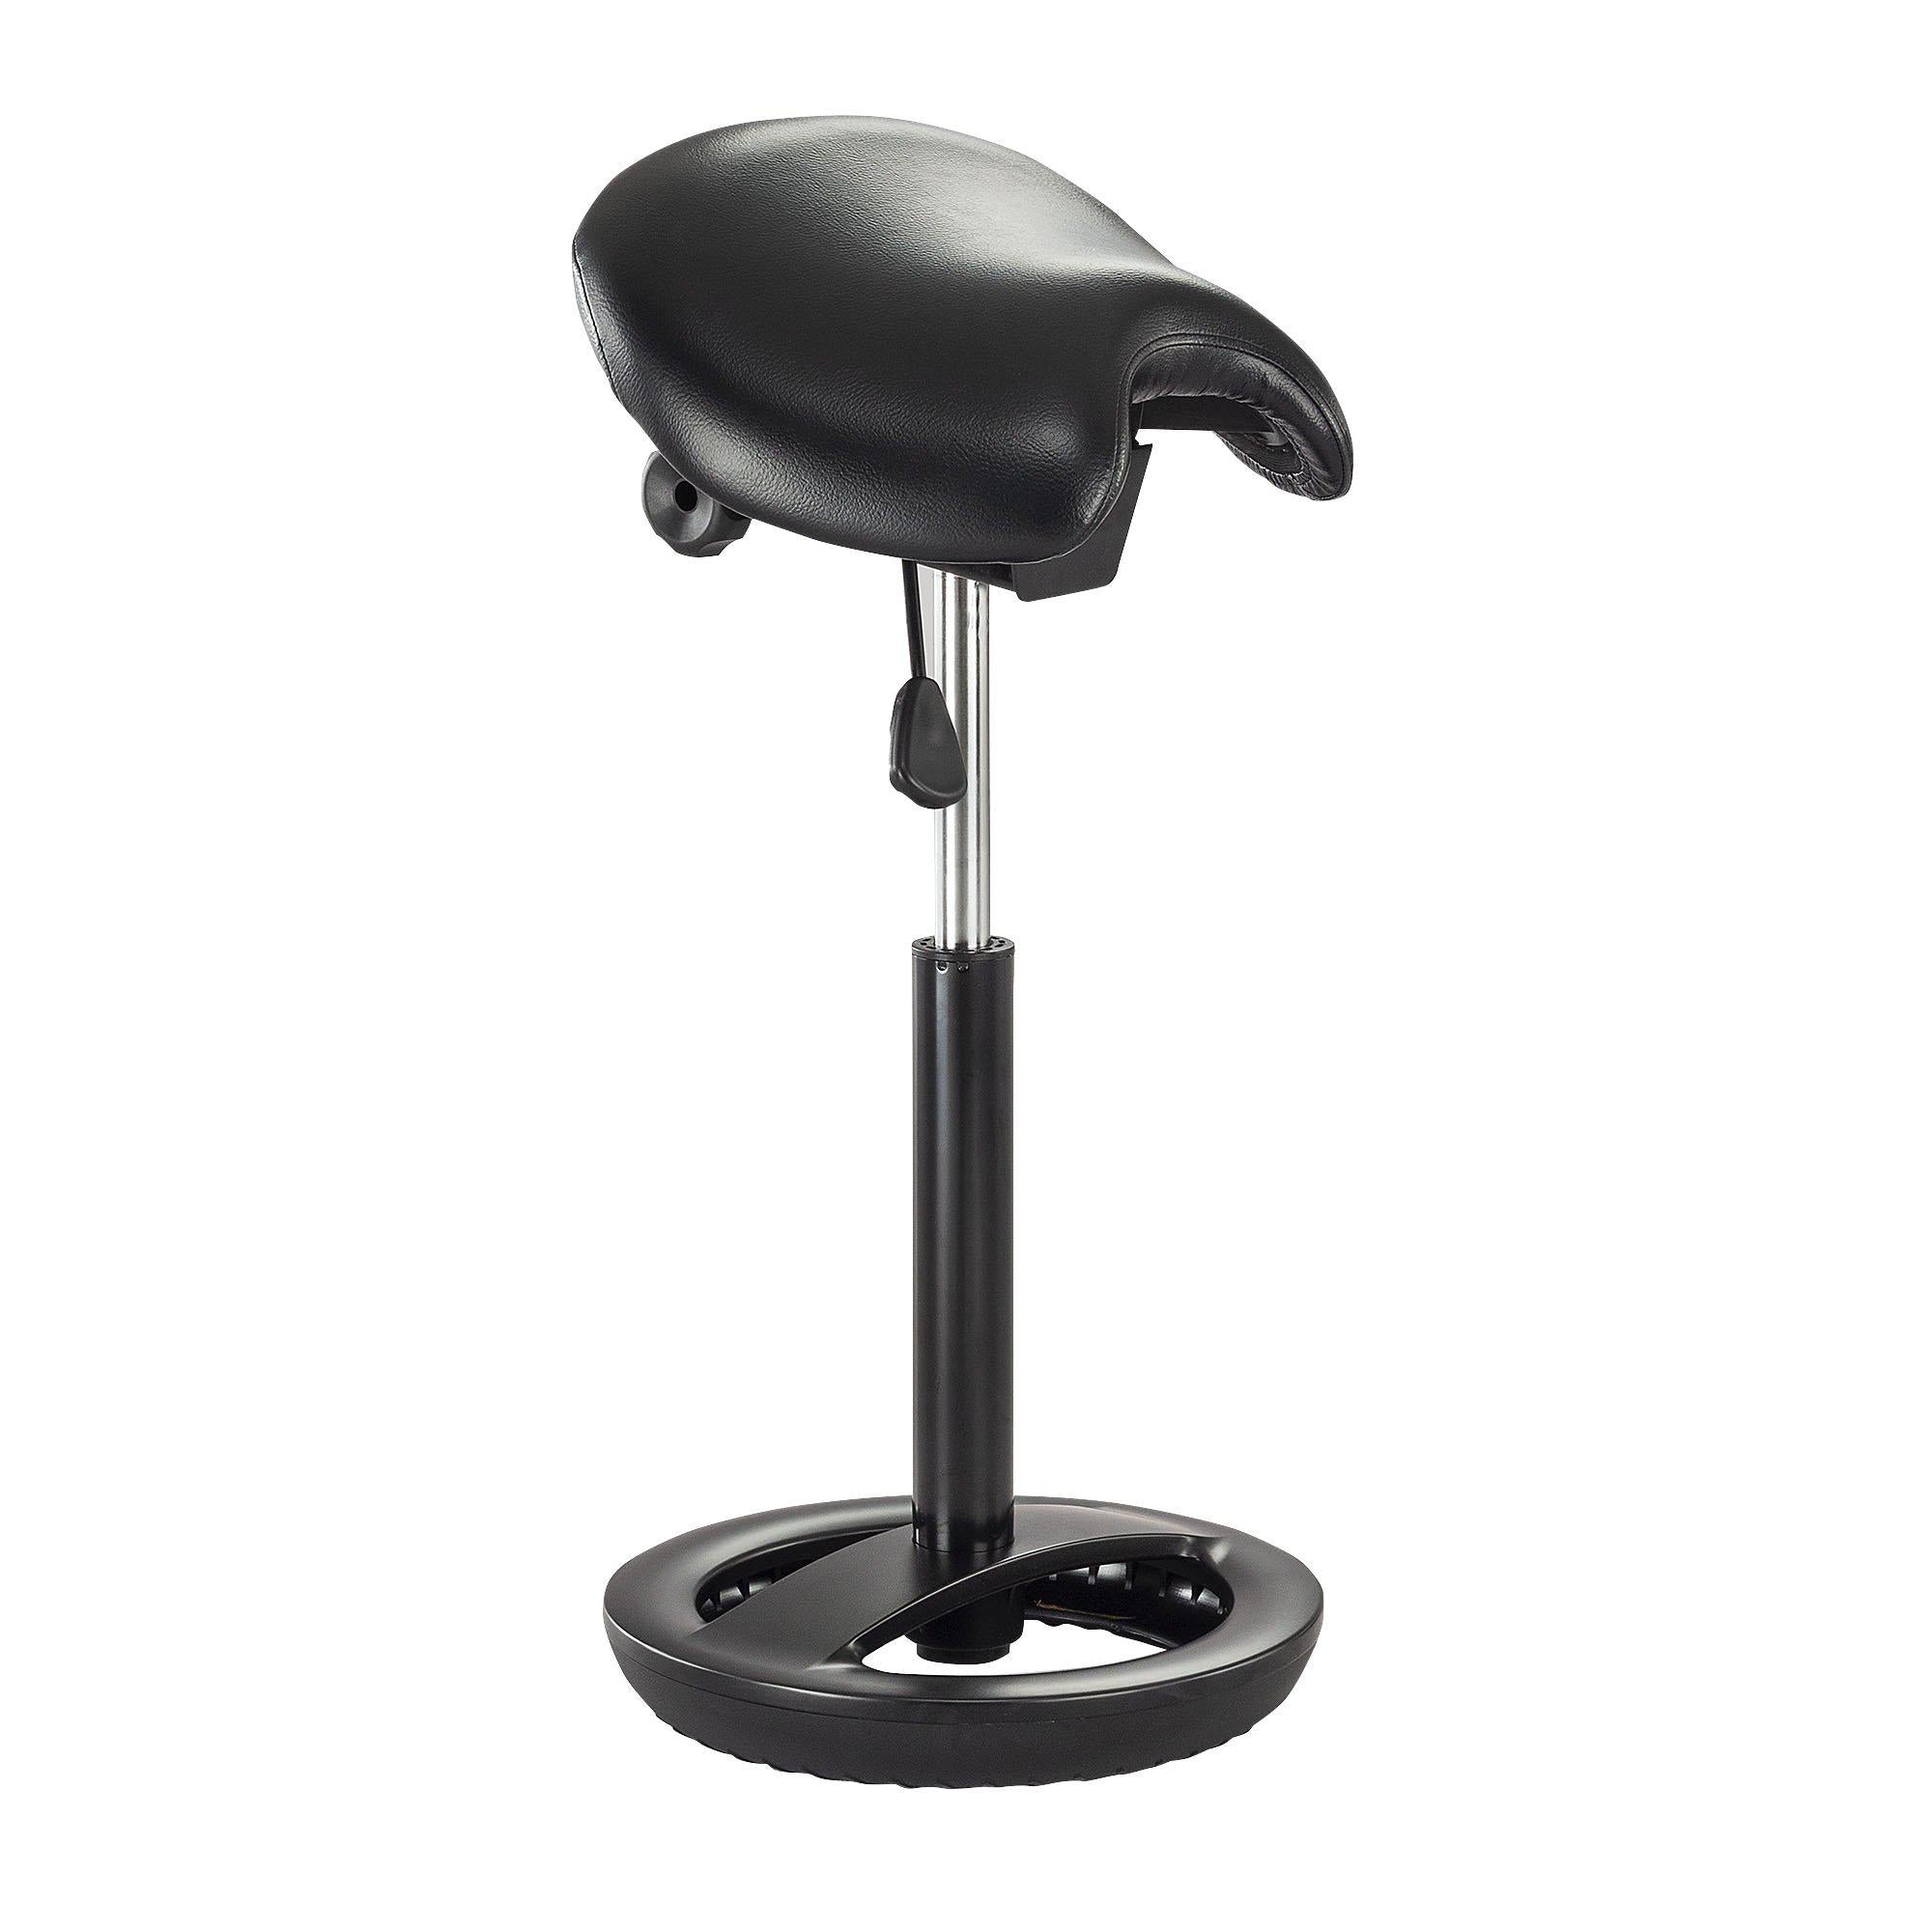 Twixt® Saddle Seat Perching/Leaning Stool, Extended Height, FREE SHIPPING